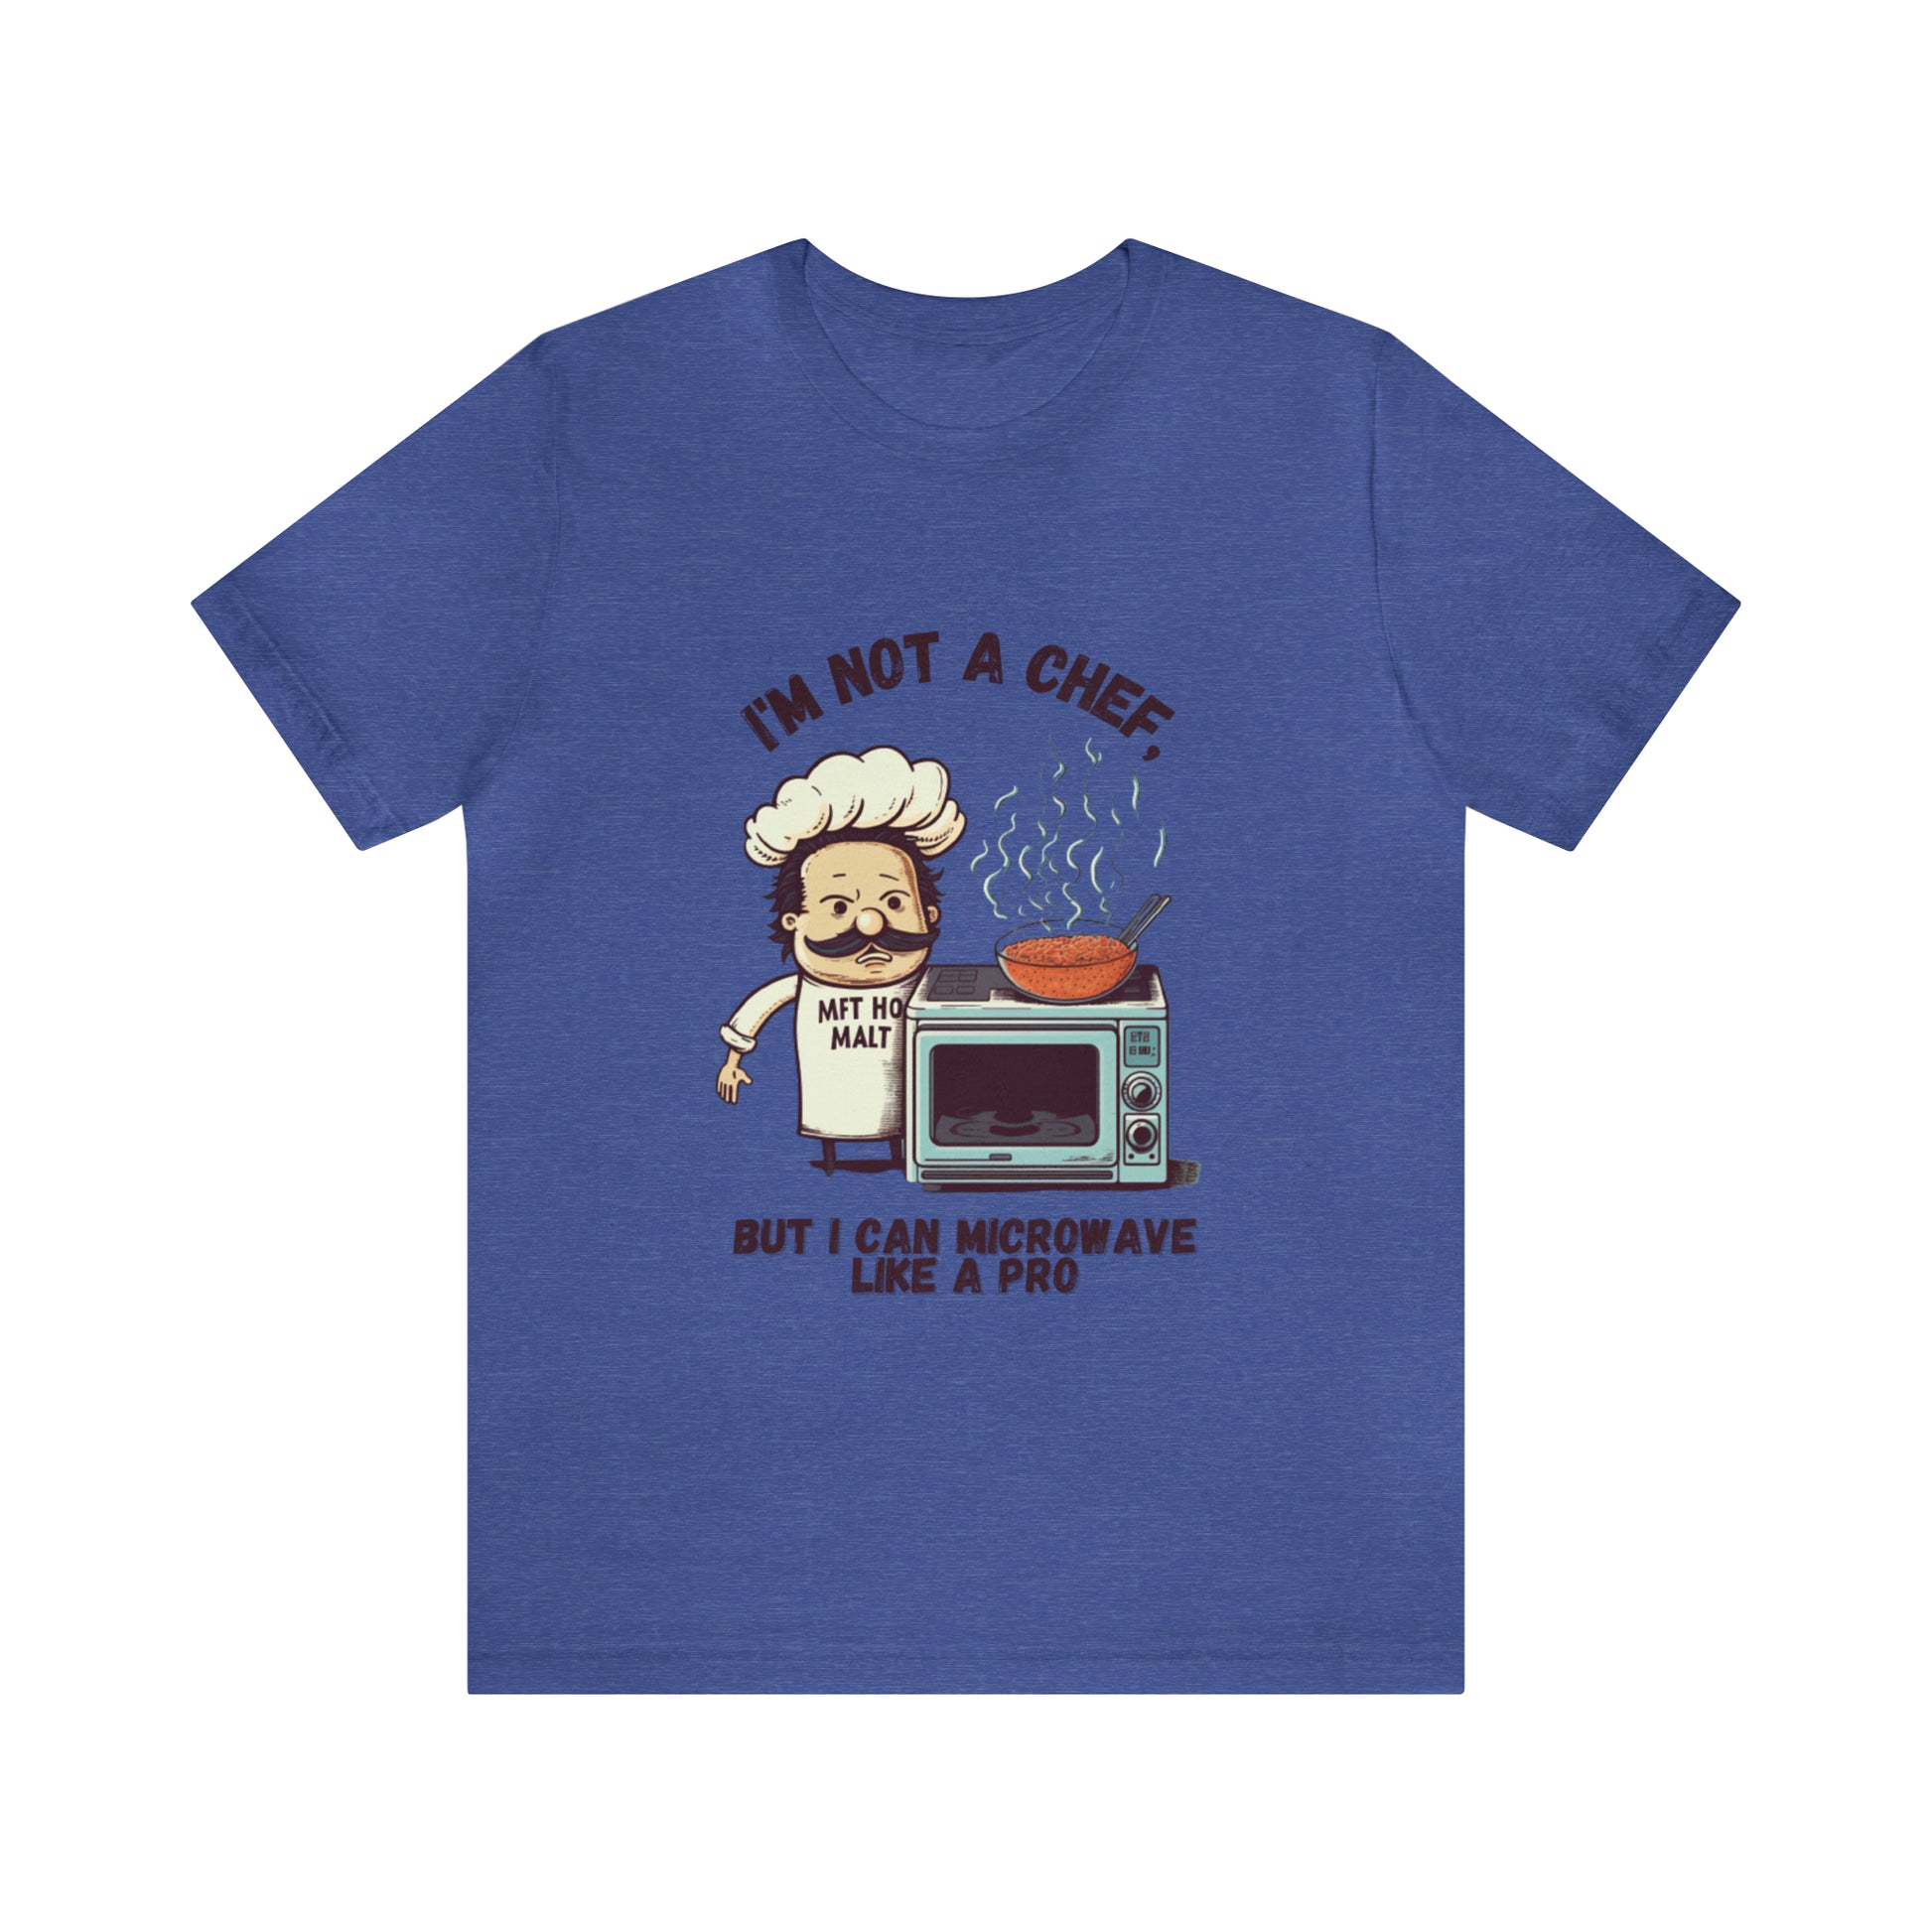 I'm not a chef, but I can microwave like a pro | Funny Unisex Short Sleeve Tee | Funny Chef Short Sleeve Tee Shirt - CrazyTomTShirts